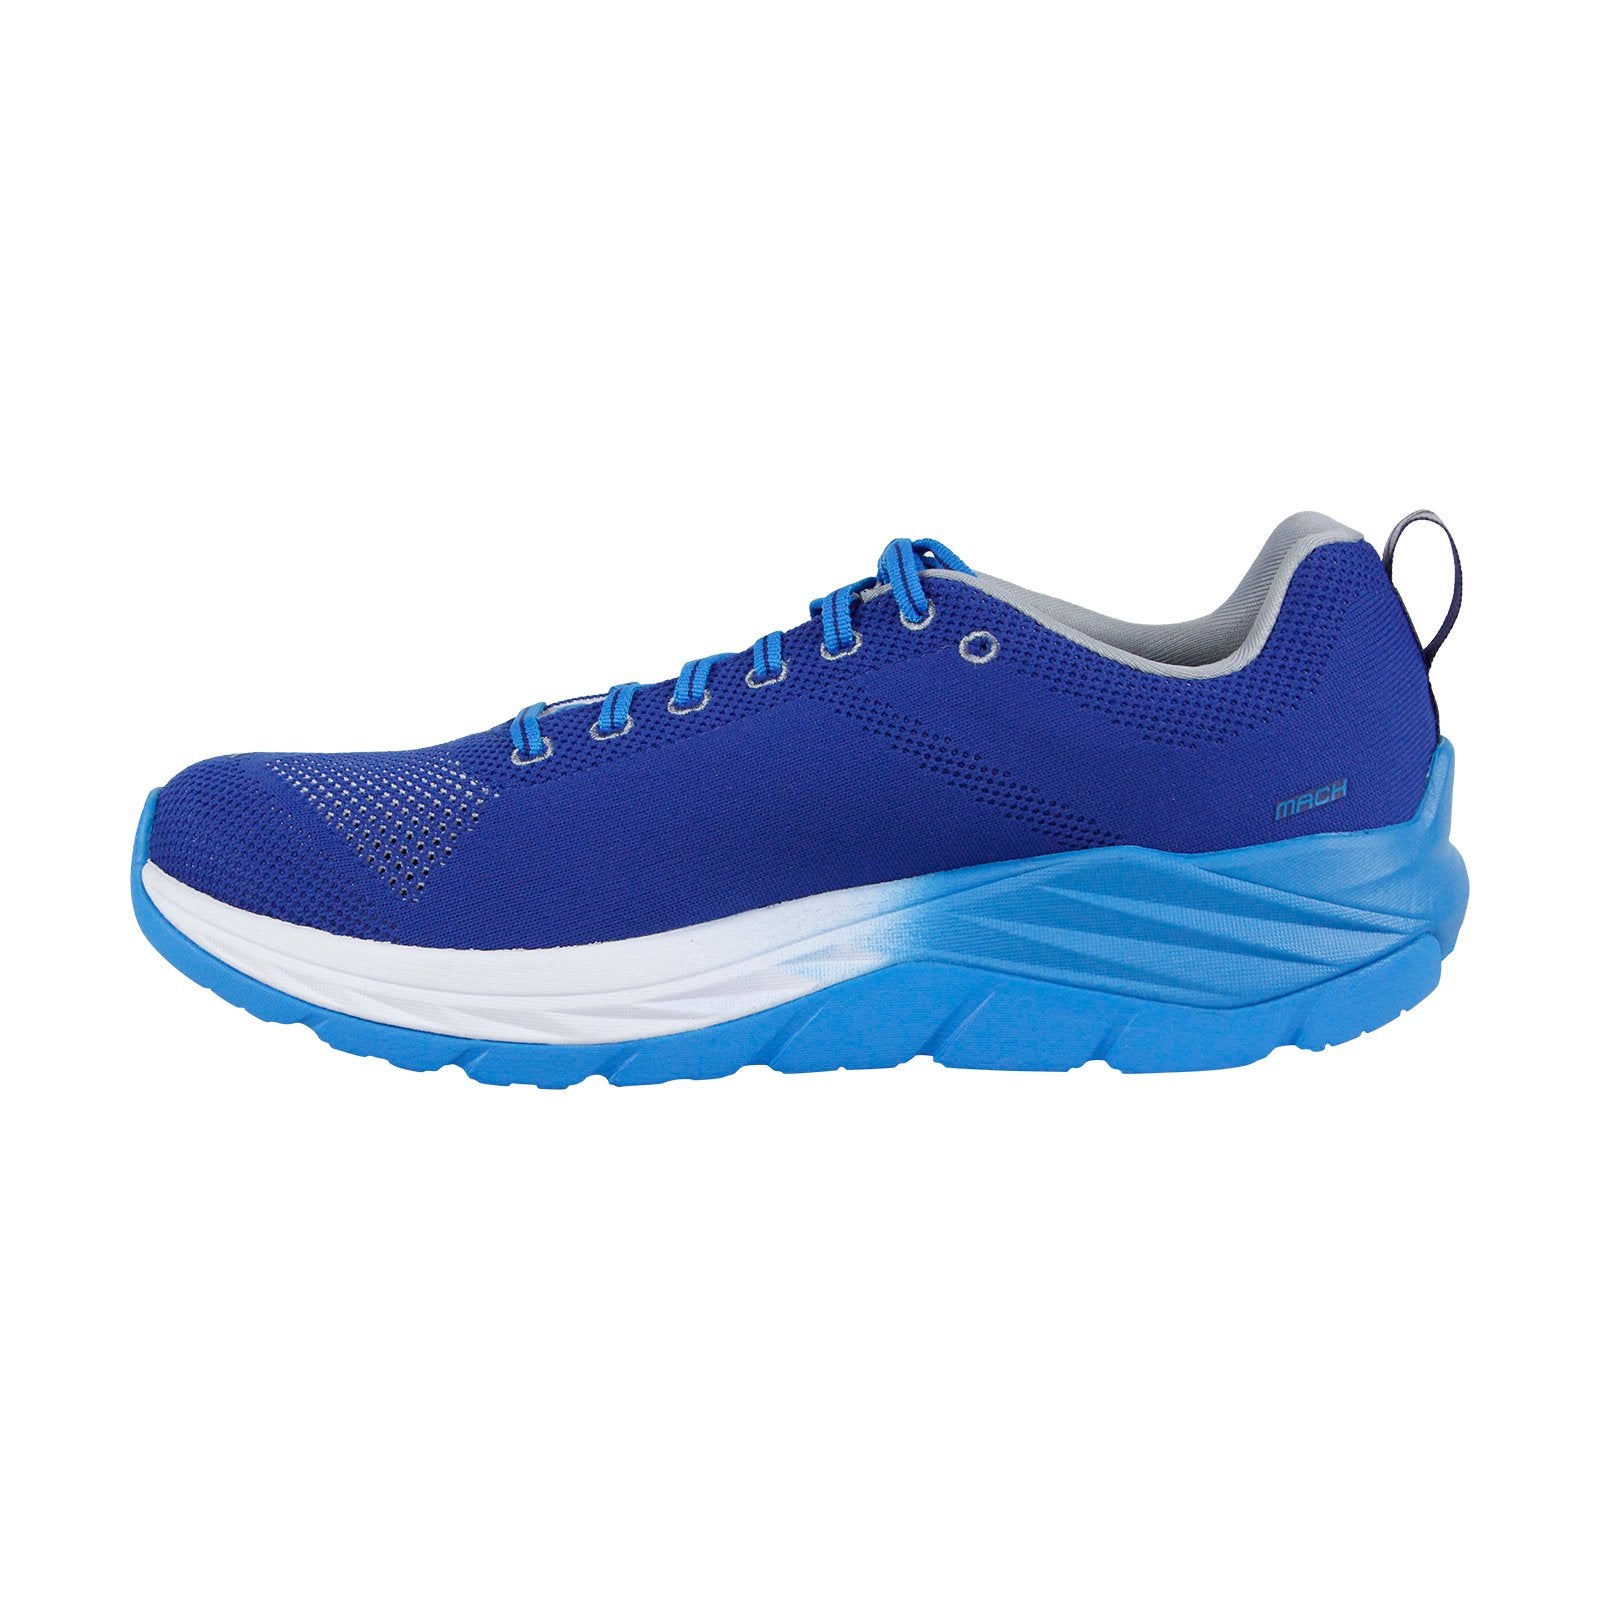 Hoka One One Mach 1019279 Mens Blue Canvas Lace Up Athletic Running Sh ...